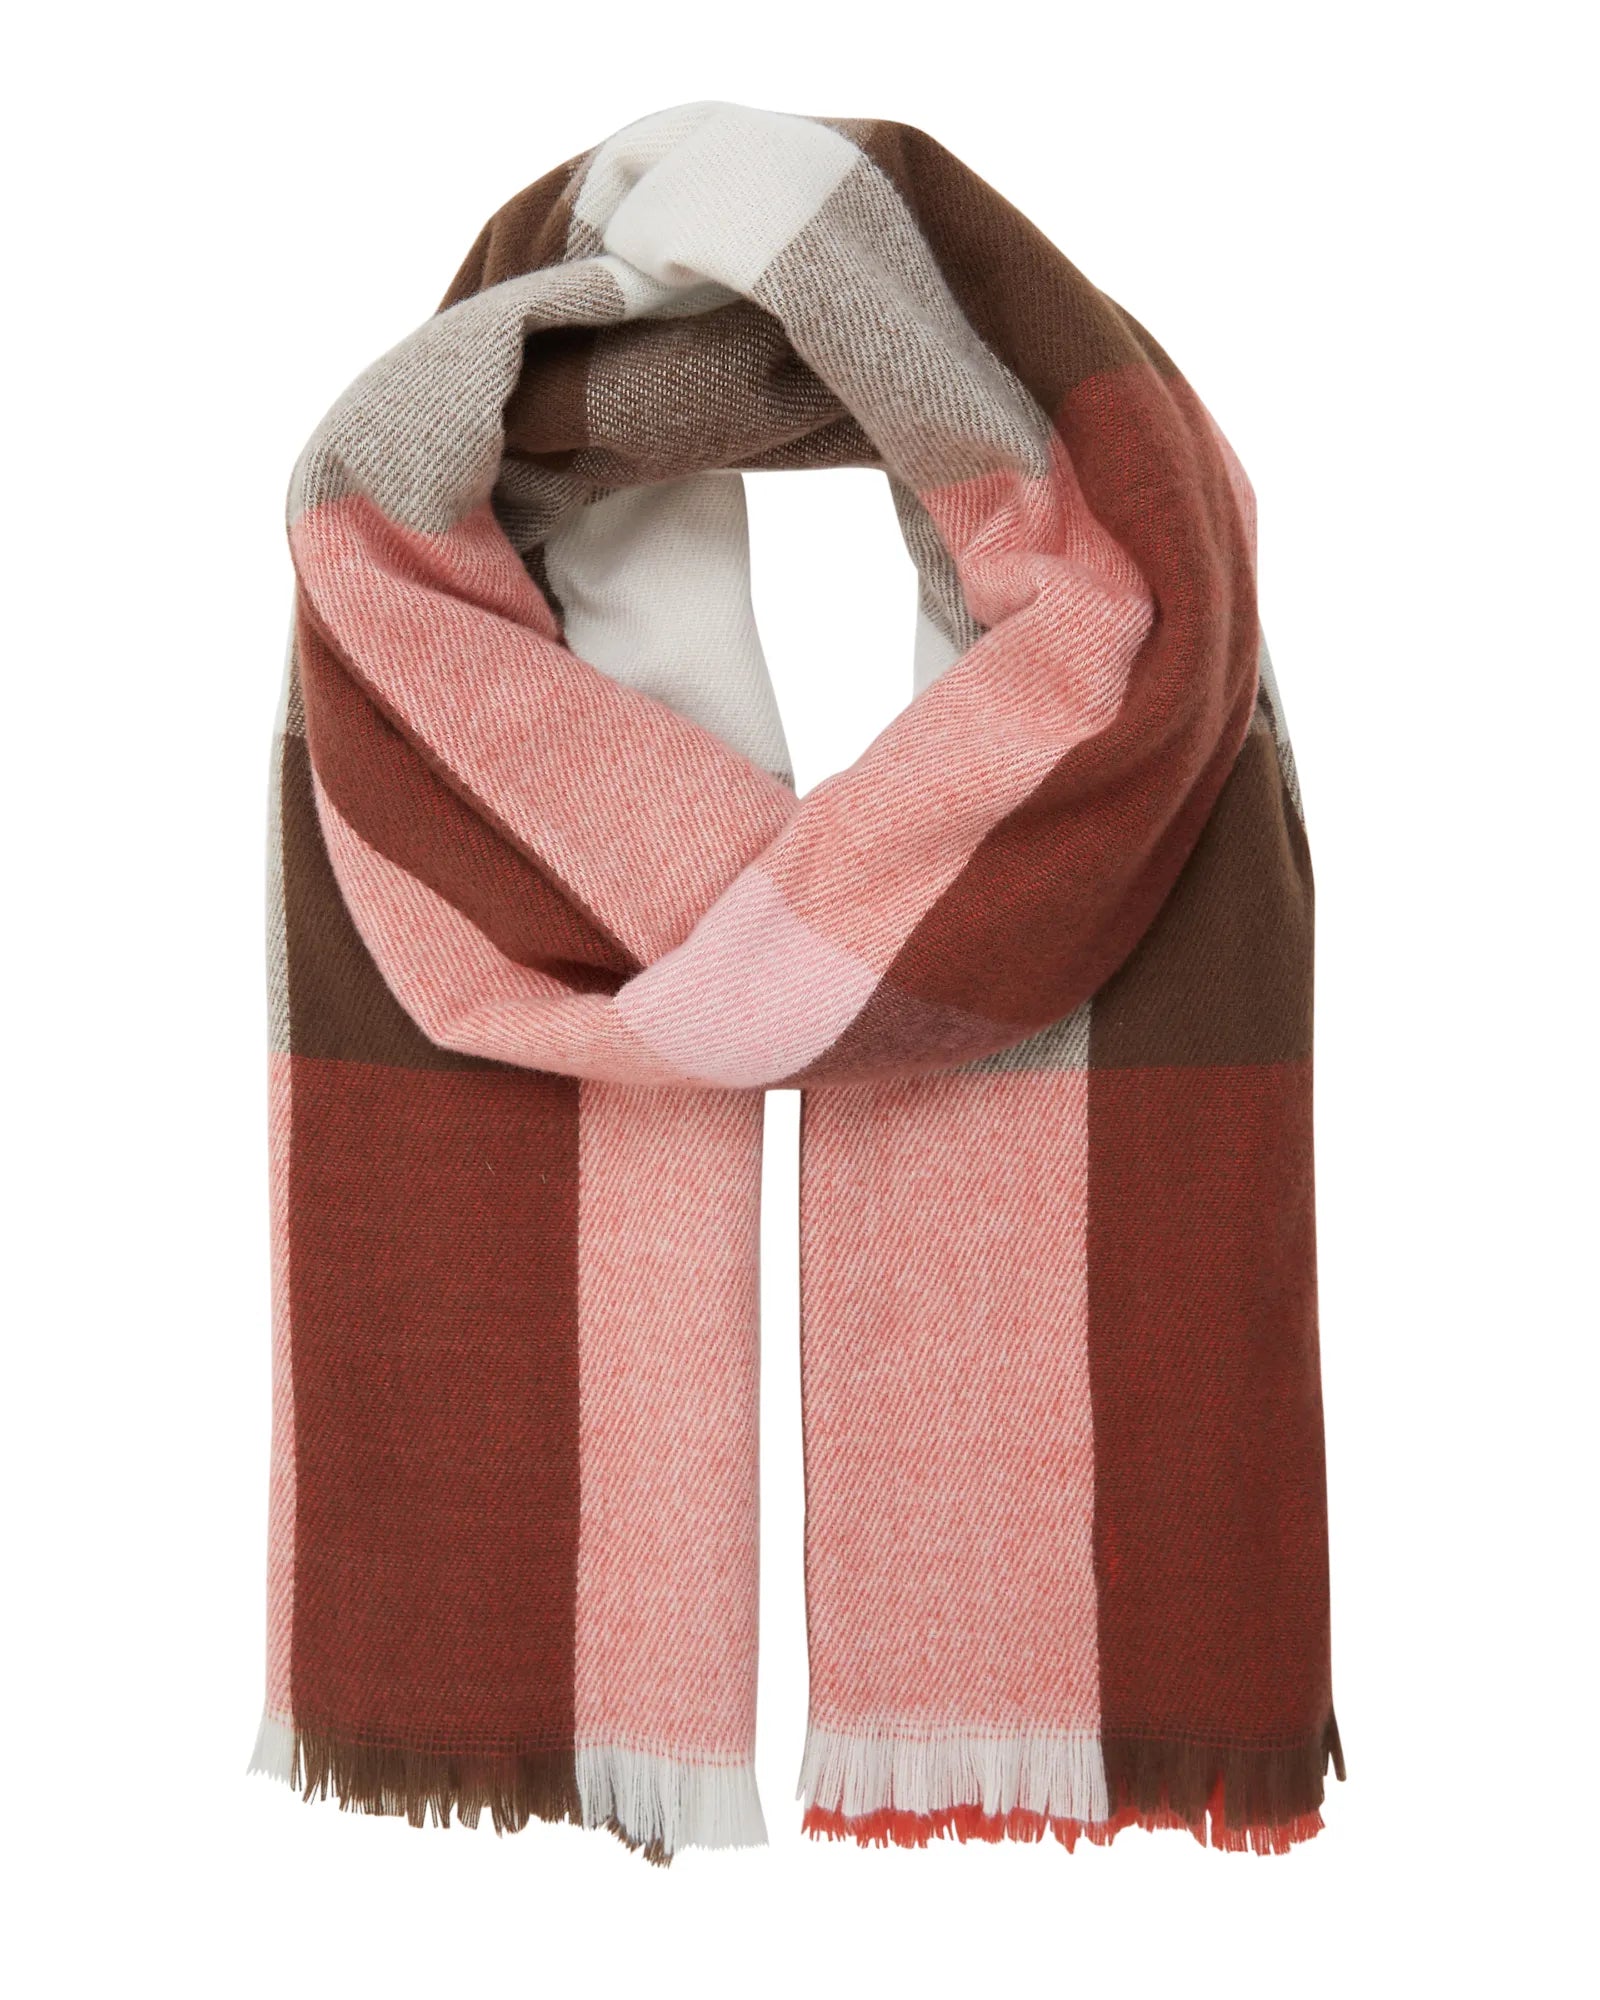 Berry Scarf - Red Alert Mix